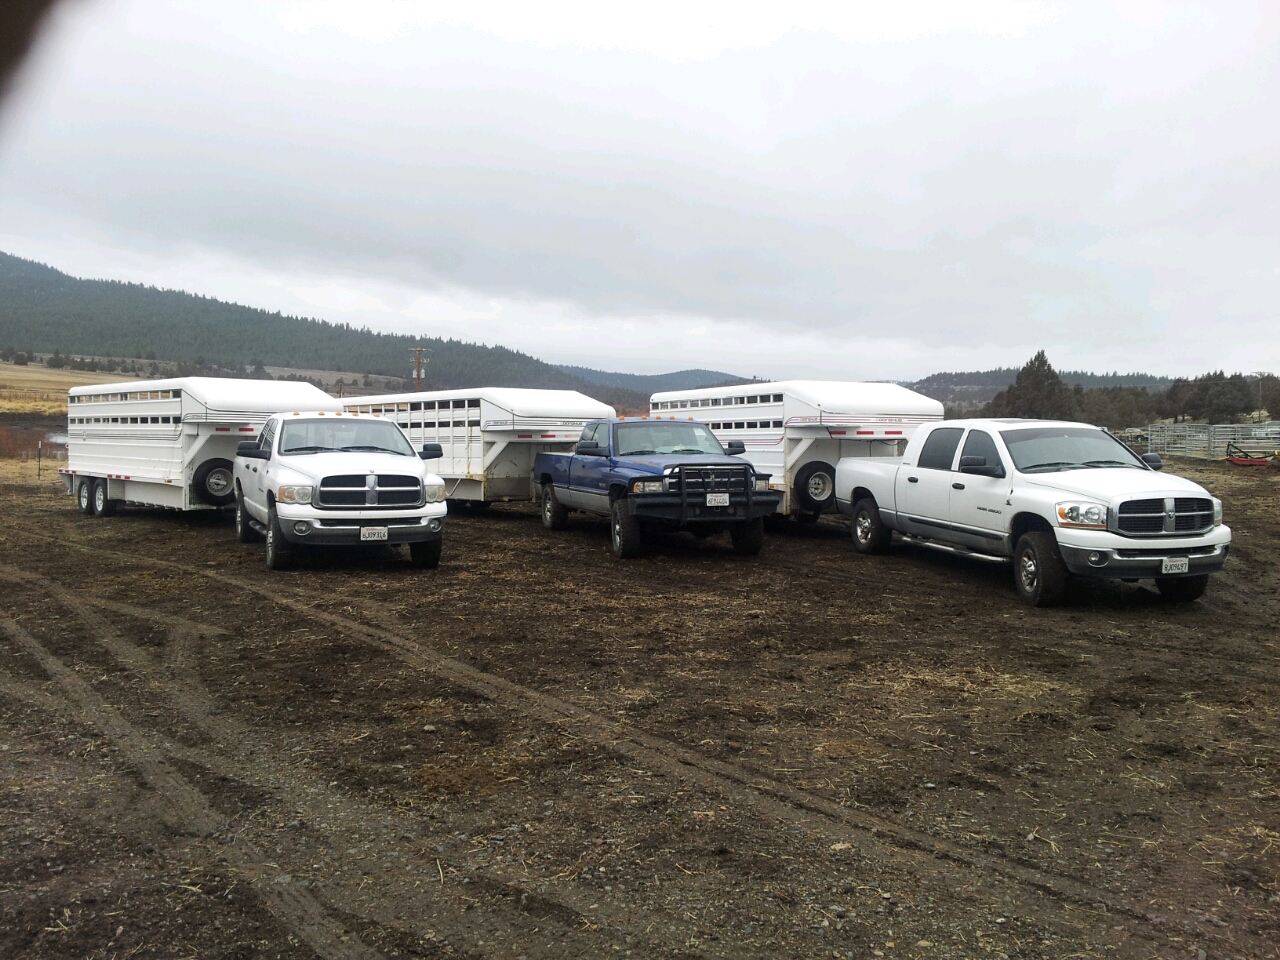   True Dependability    "After 14 years of dependability from our first Donahue trailer, we have added two more to the collection!"   J. McCulley MU Ranch (Canby, CA) 